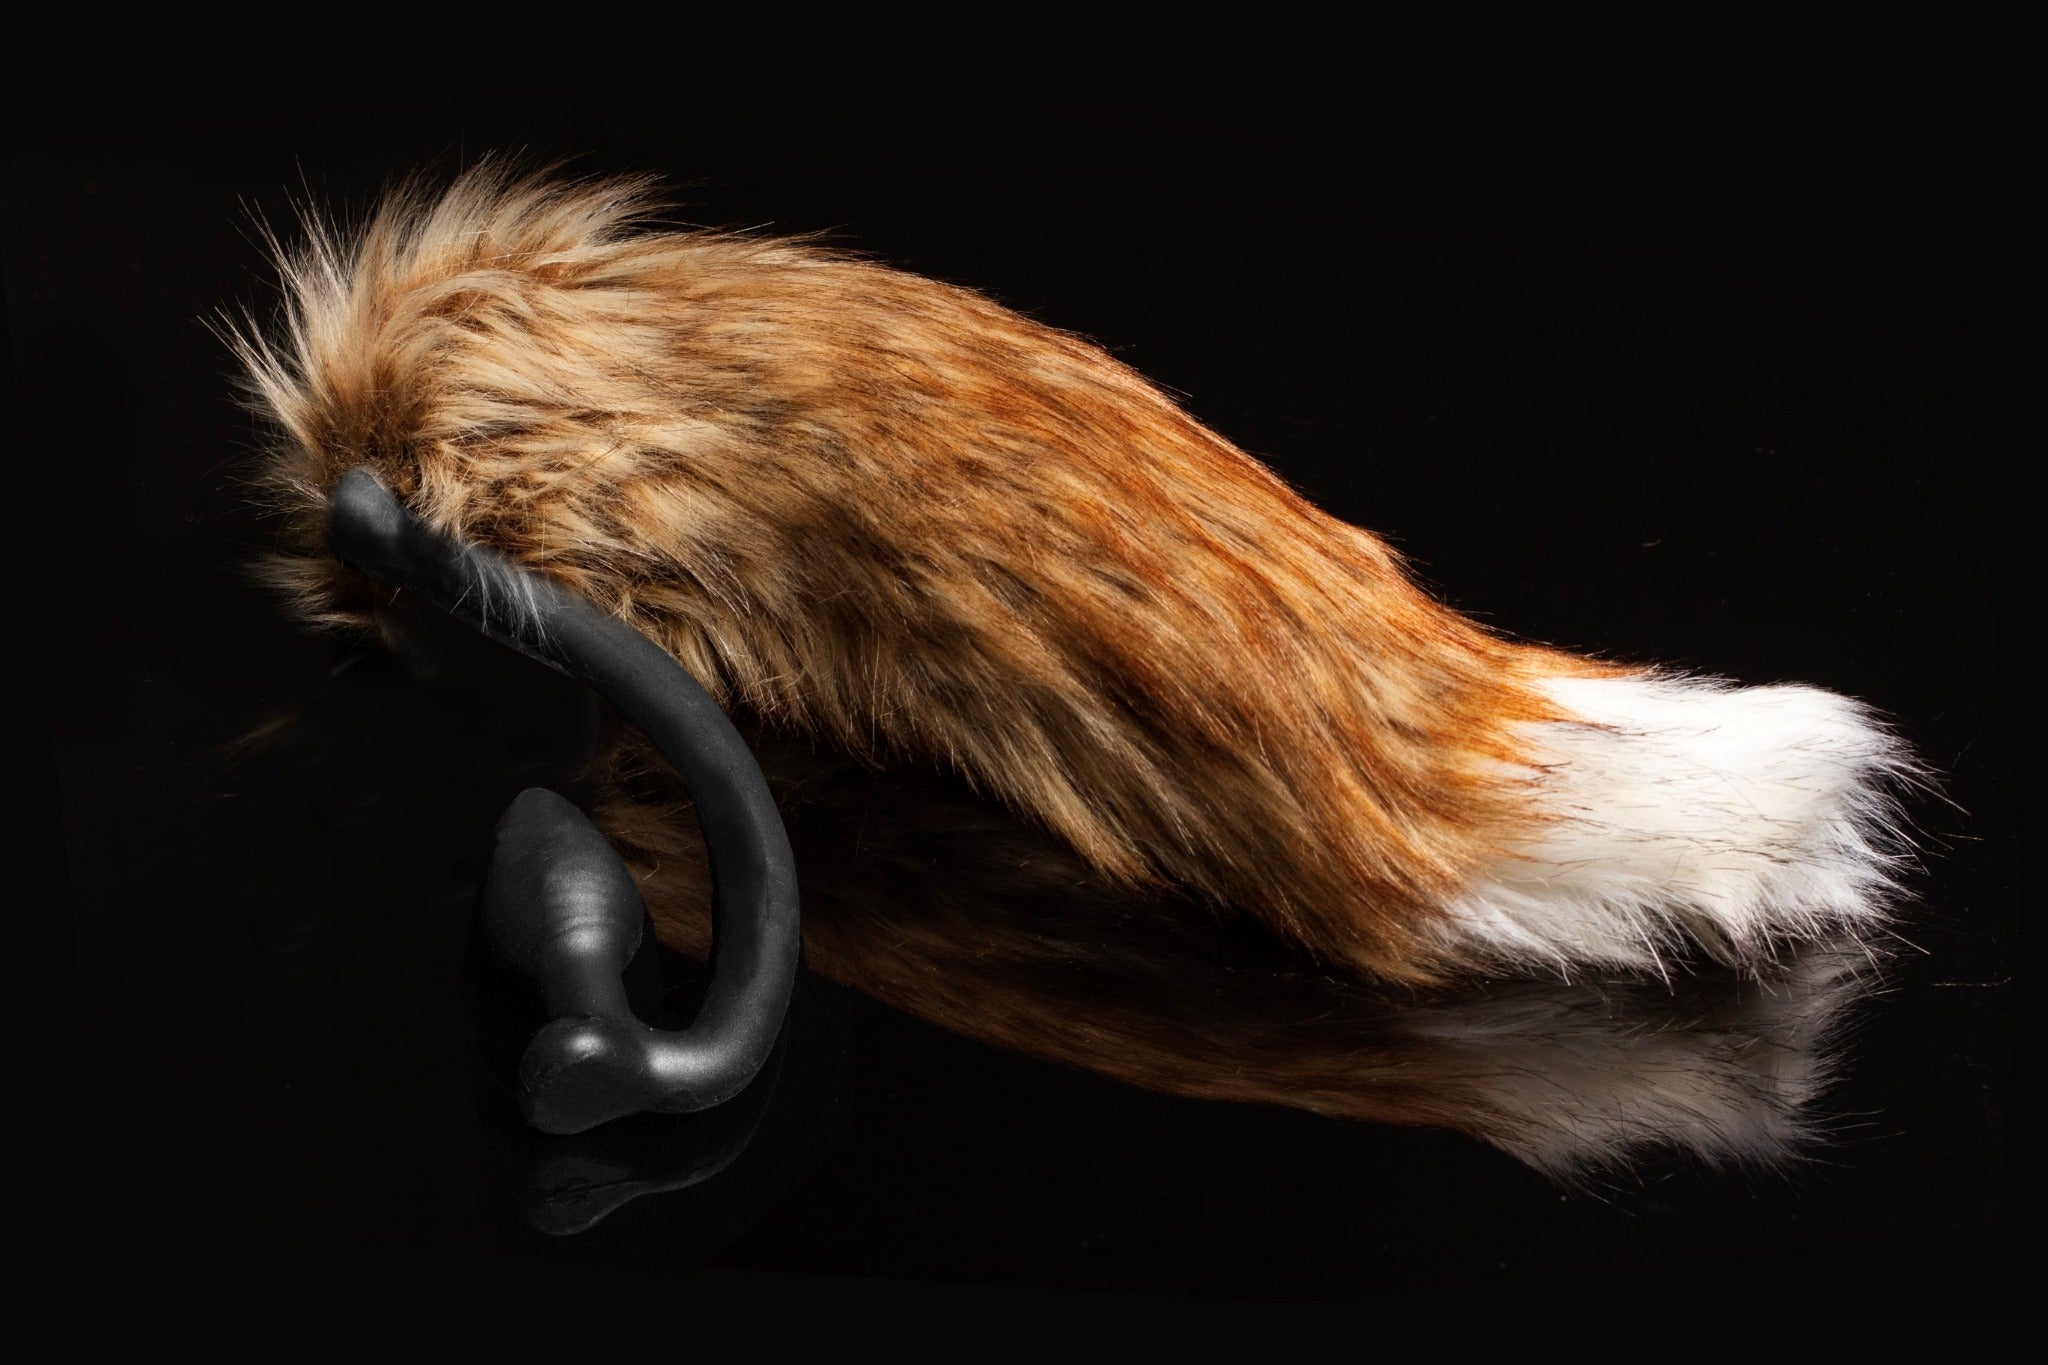 Red Fox tail butt plug made of silicone and faux fur, but the plug is hooked so when worn, the tail sits at the bottom of the lumbar area. It’s laying flat on a black background.